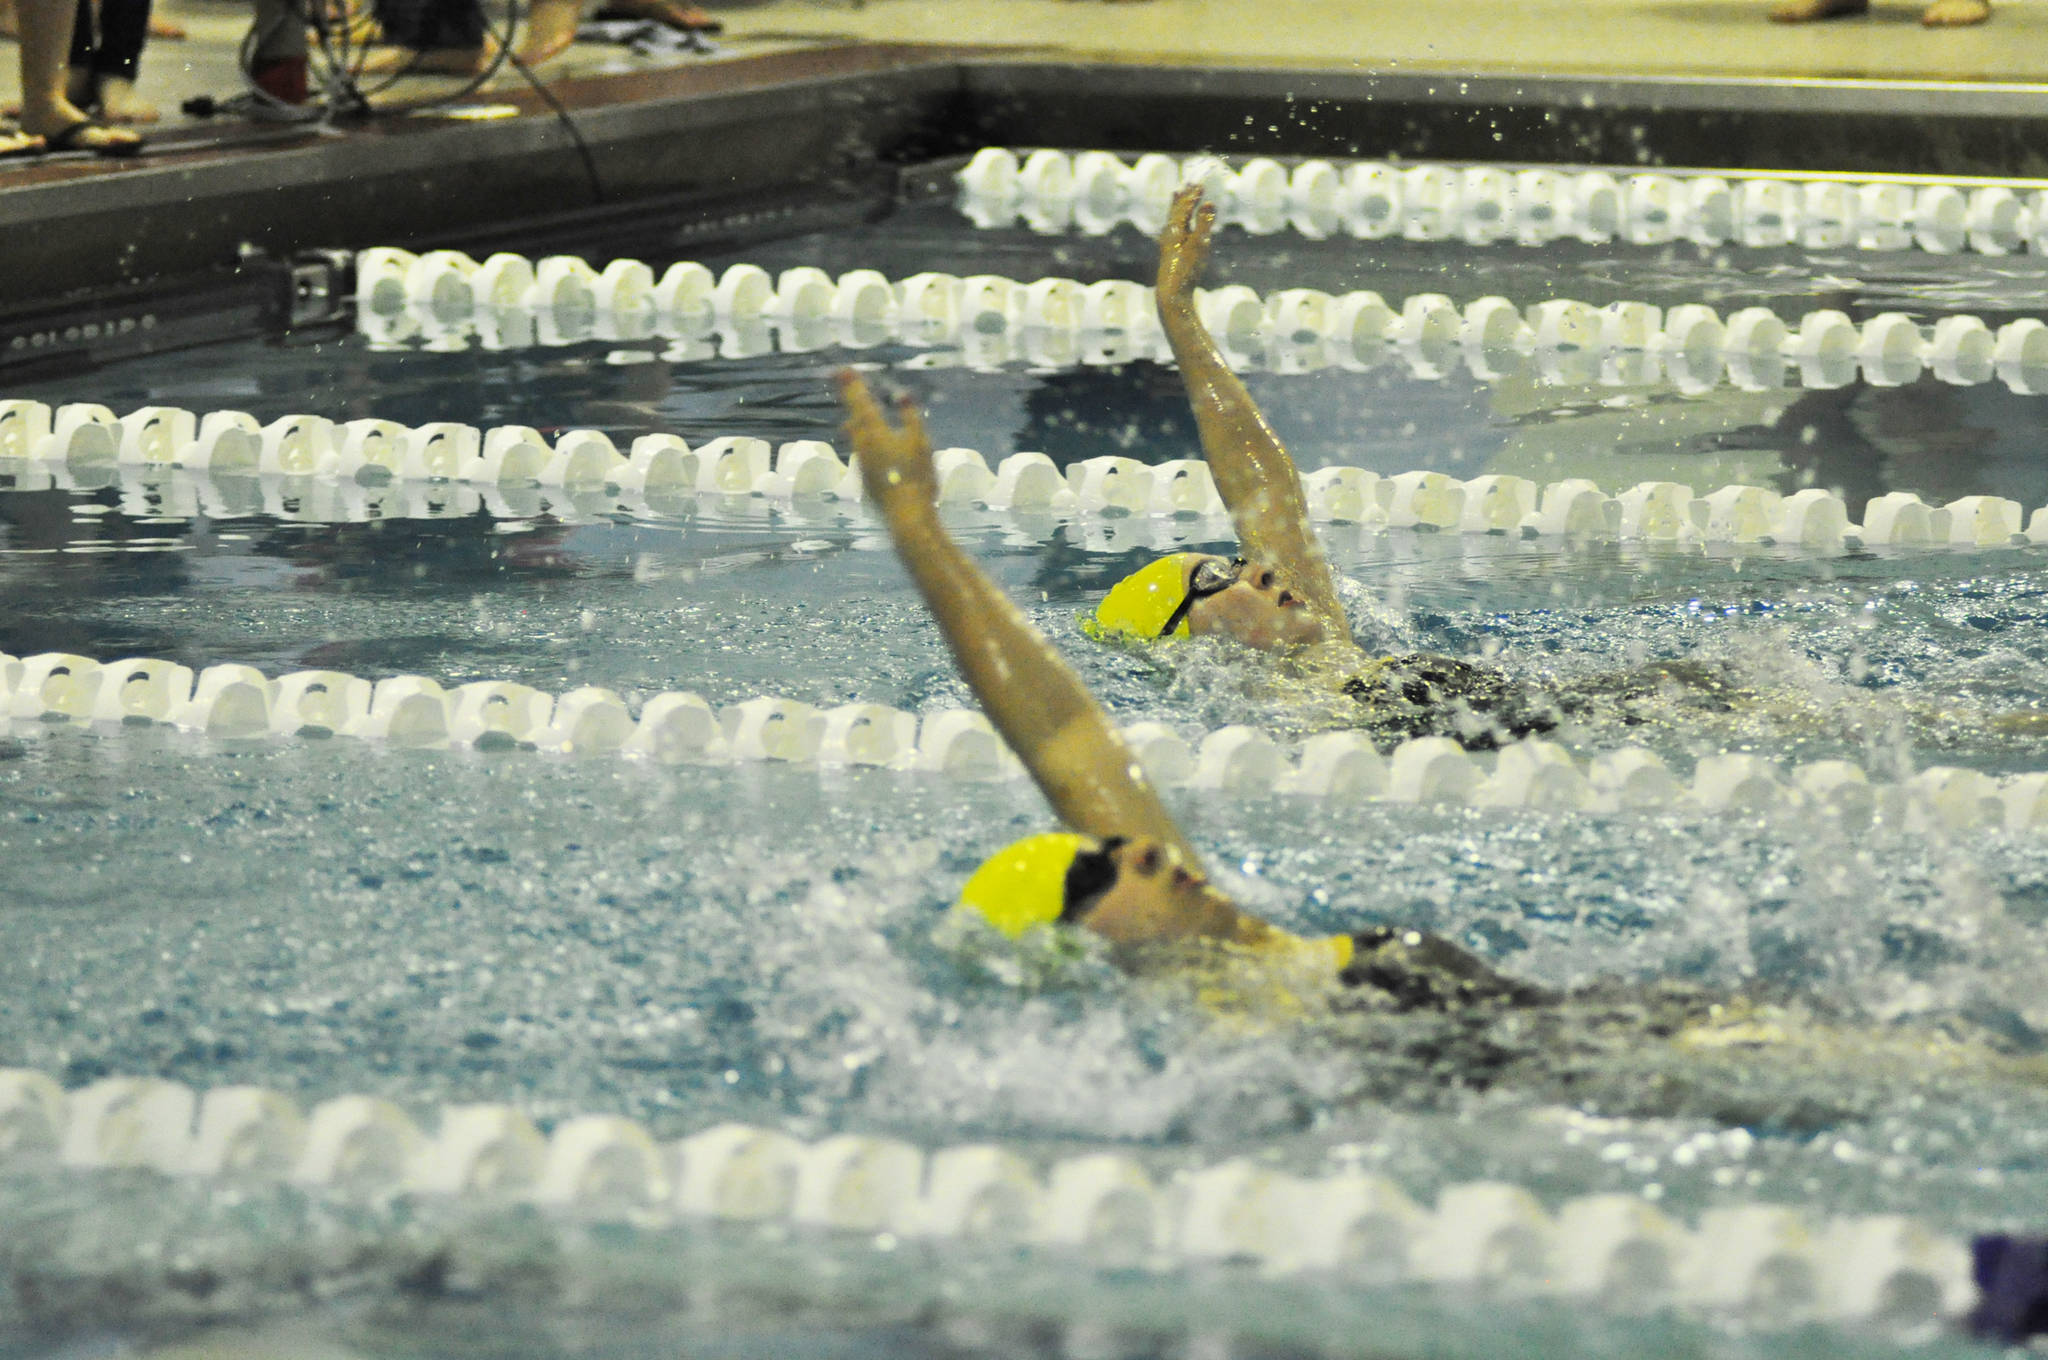 Freshmen Mia Groves (foreground) and Katelyn Engebretsen (background) compete in the Region III Swimming and Diving Championships held Friday and Saturday, Oct. 27-28, 2017 in Palmer, Alaska. (Photo submitted)